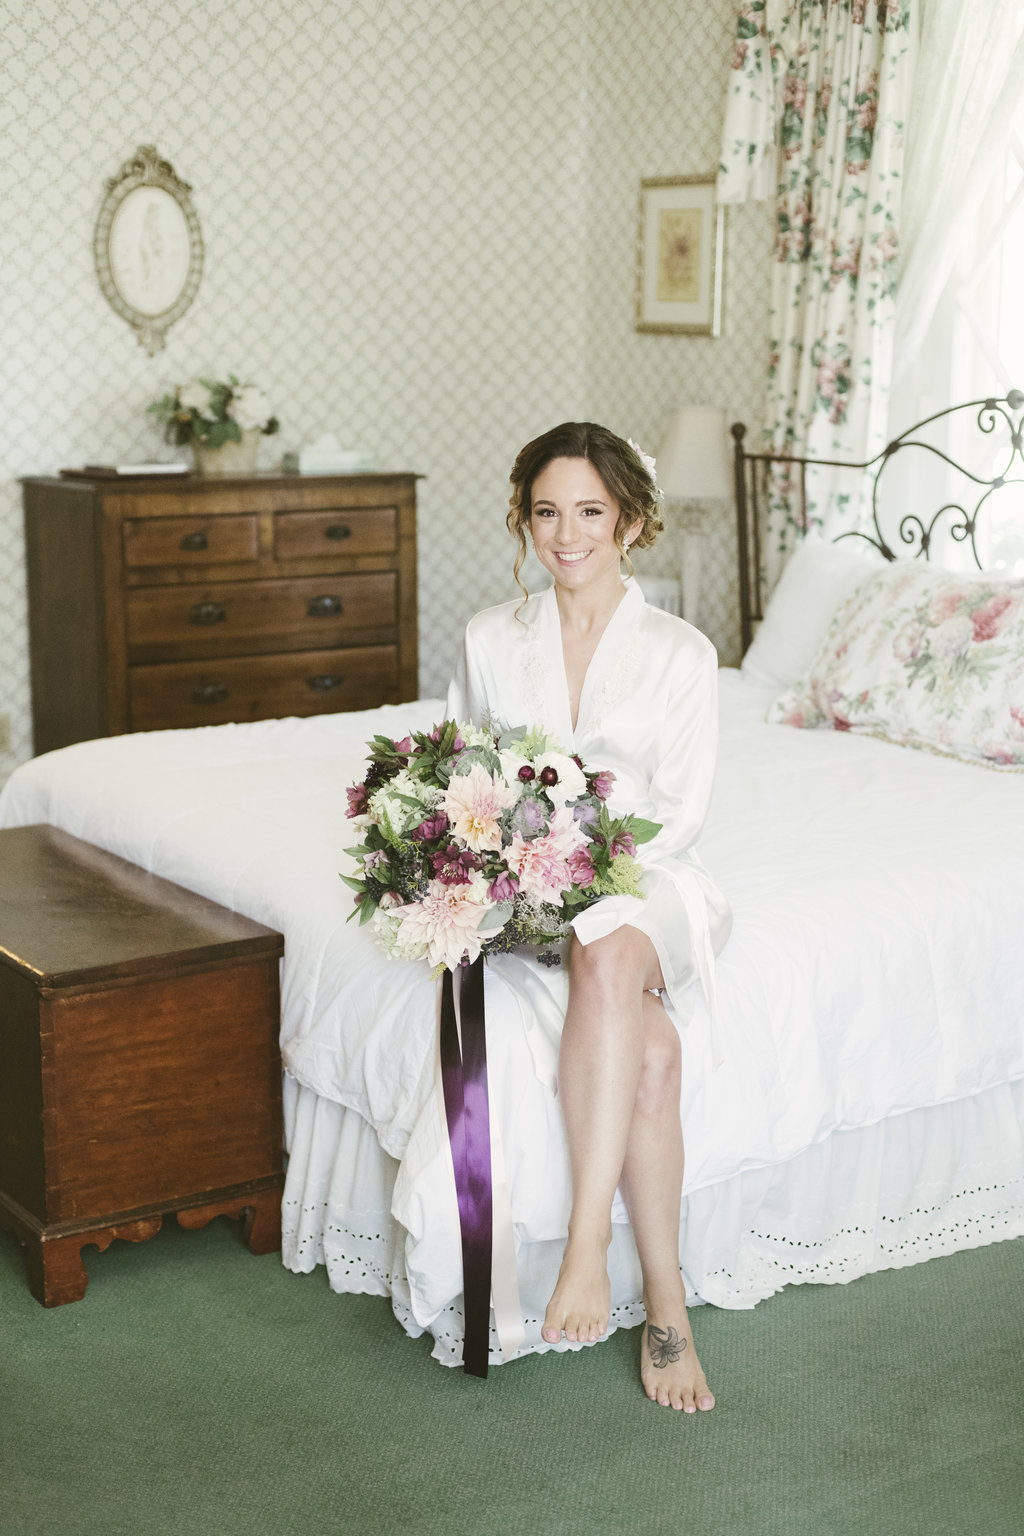 Monica-Relyea-Events-Alicia-King-Photography-Delamater-Inn-Beekman-Arms-Wedding-Rhinebeck-New-York-Hudson-Valley32